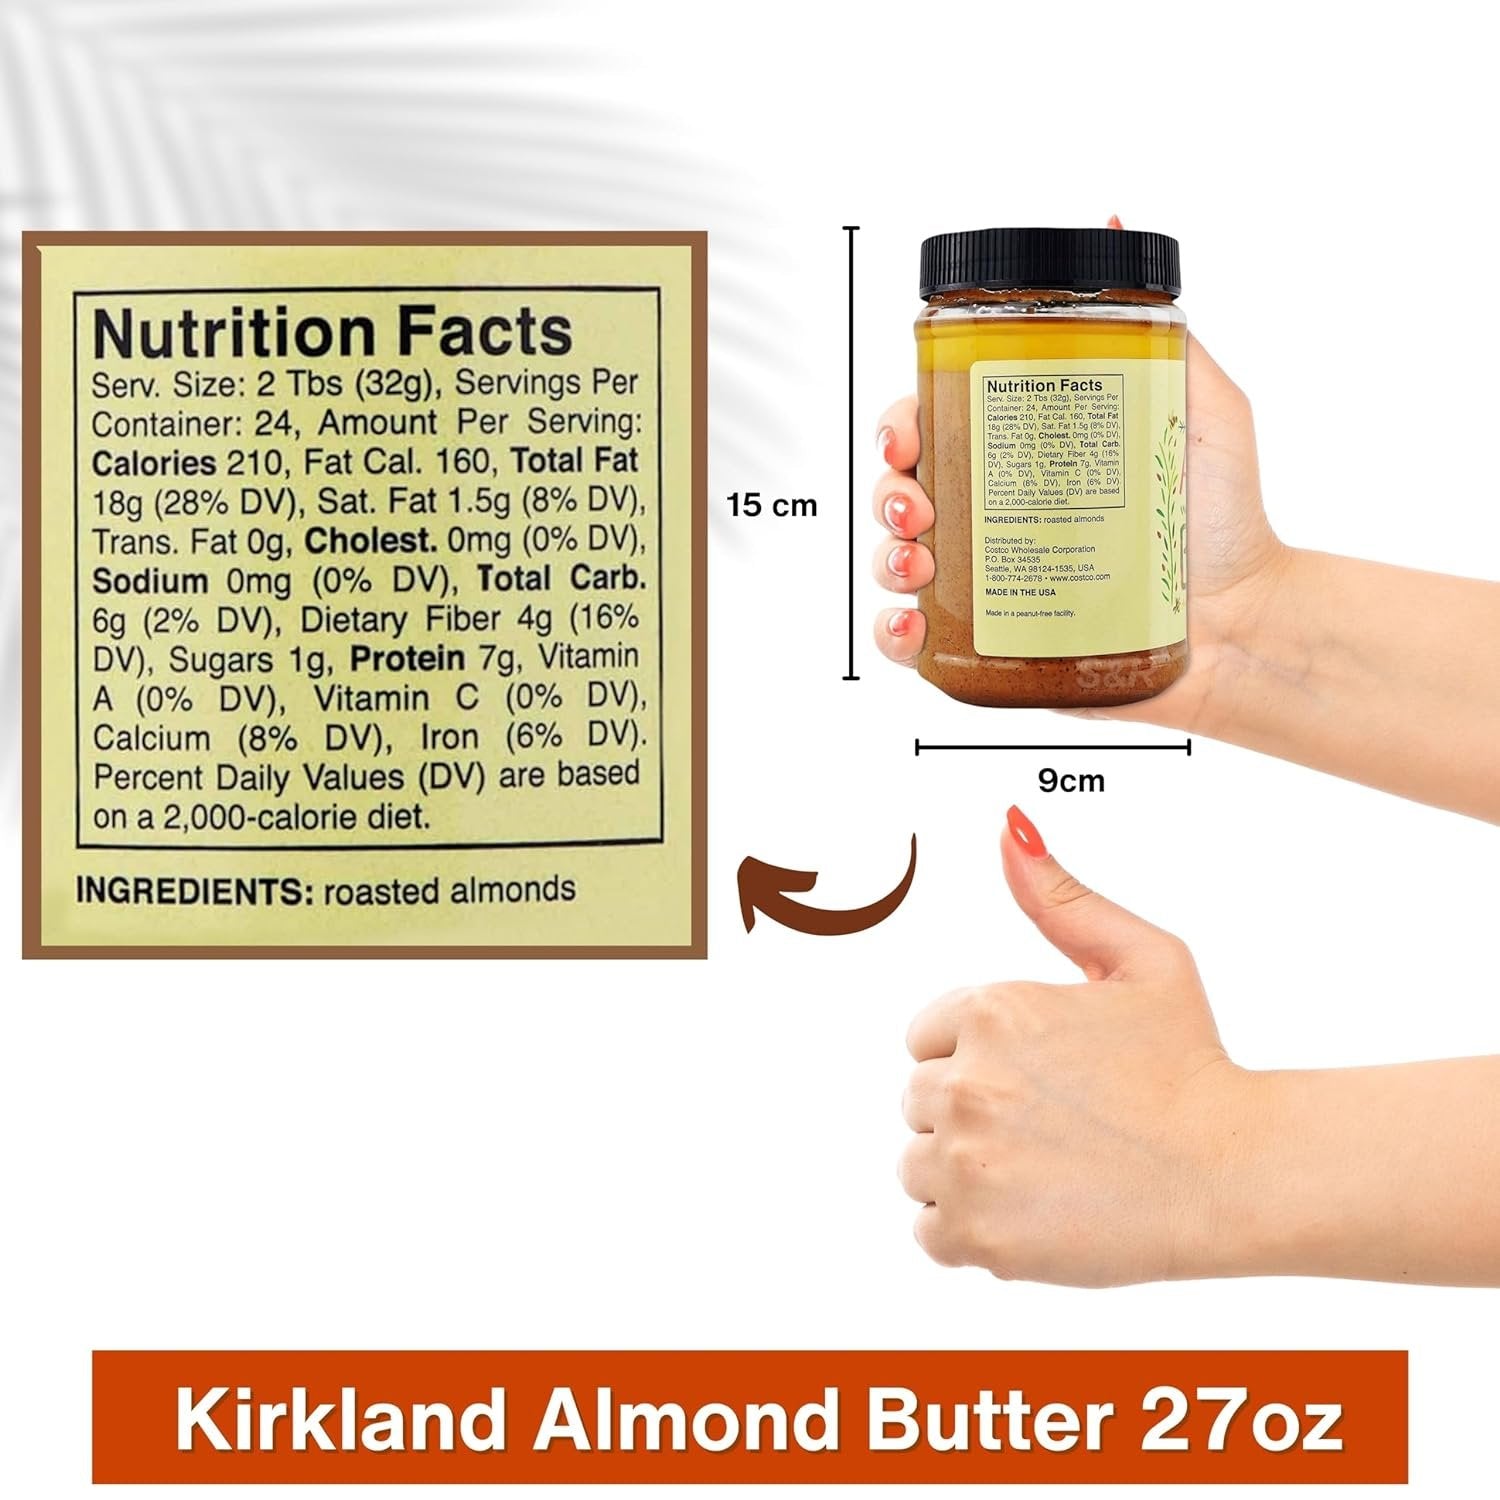 Kirkland Signature Creamy Pure Roasted Almond Butter, 27 oz (765g) - Pack of 2 with Multi-Purpose Keychain